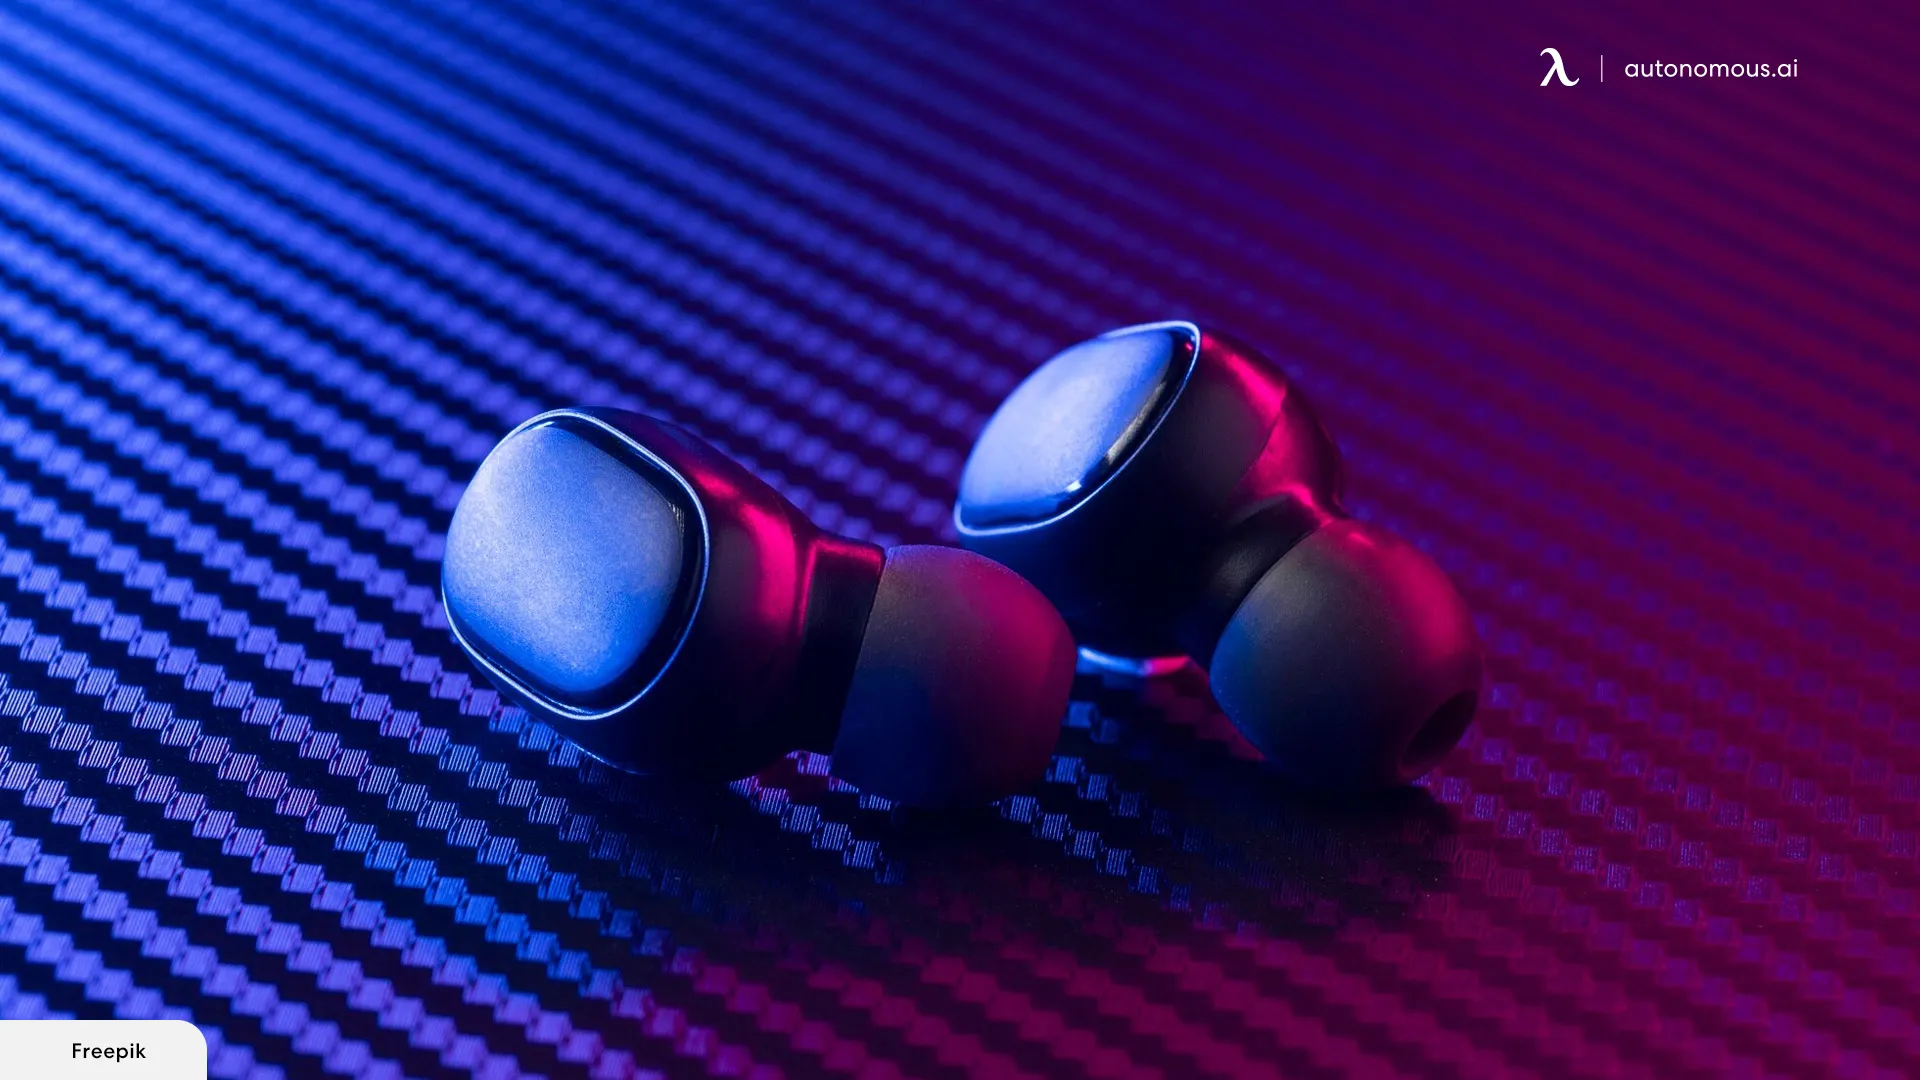 Wireless Earbuds - Gaming room design ideas